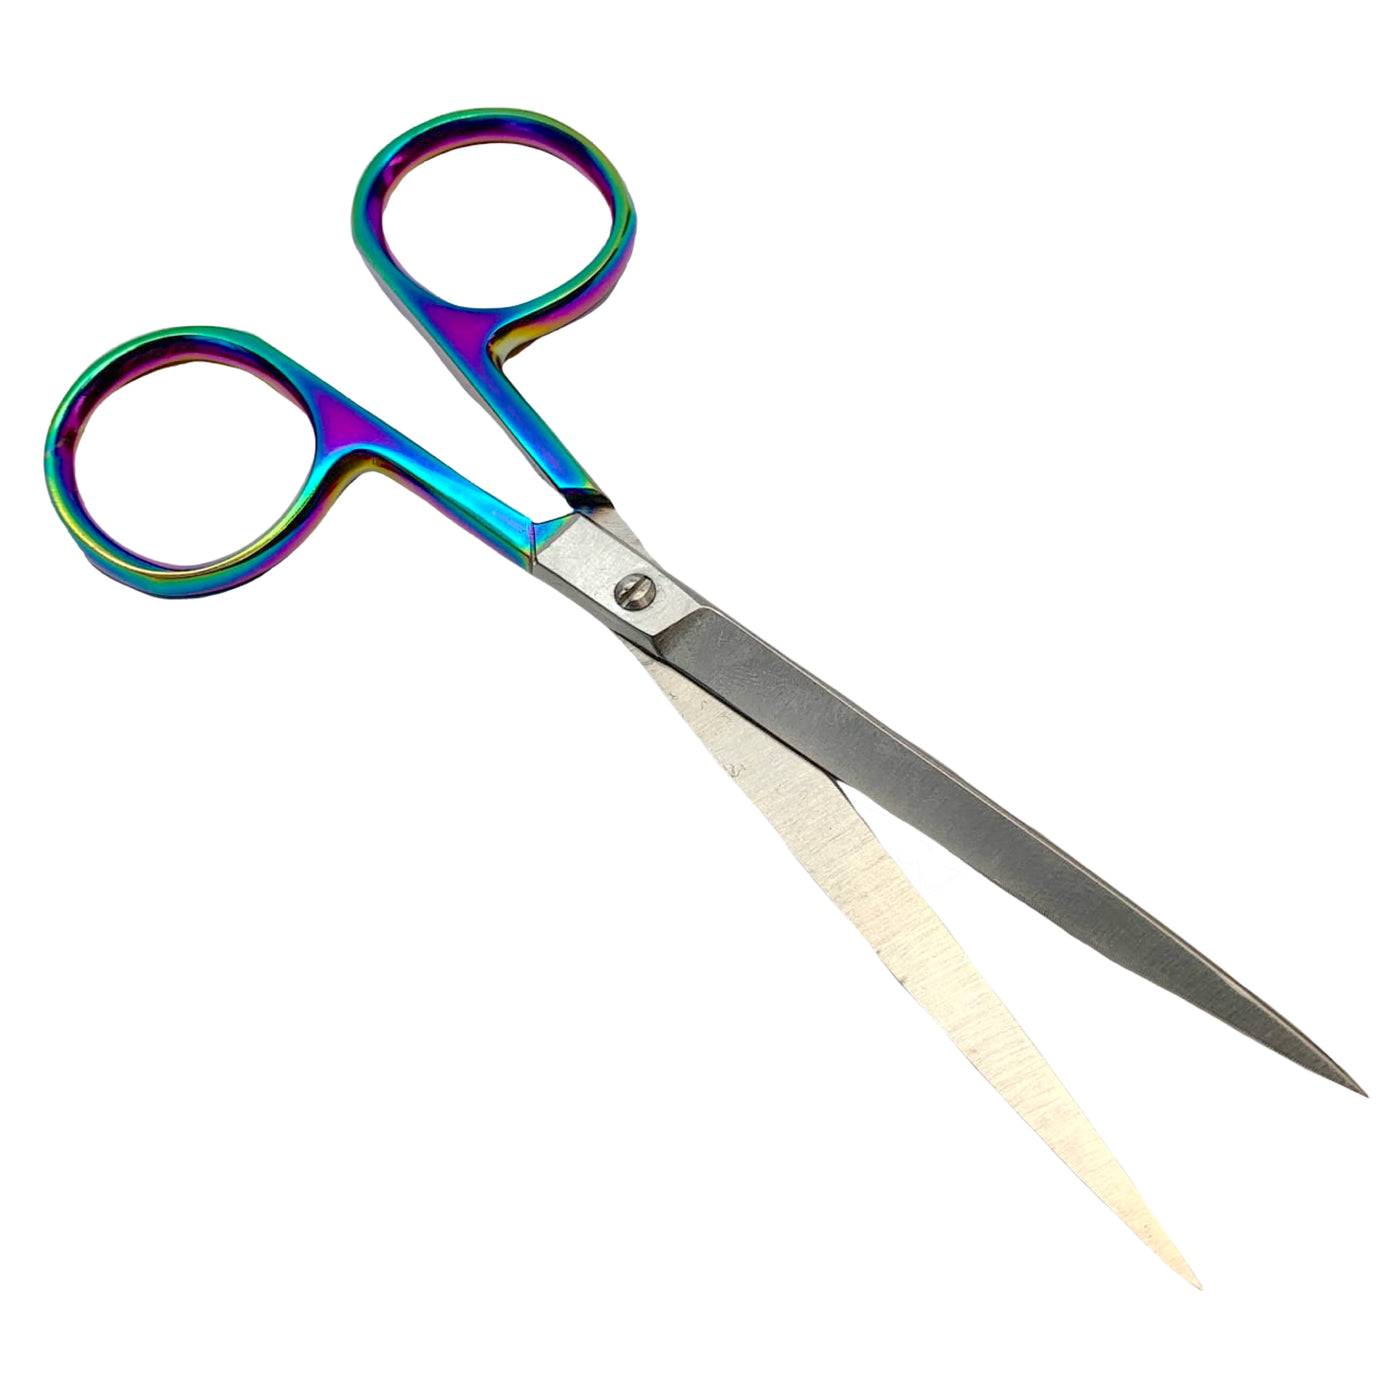 Renzetti Stainless Steel Scissors – RD Fly Fishing, a Div. of